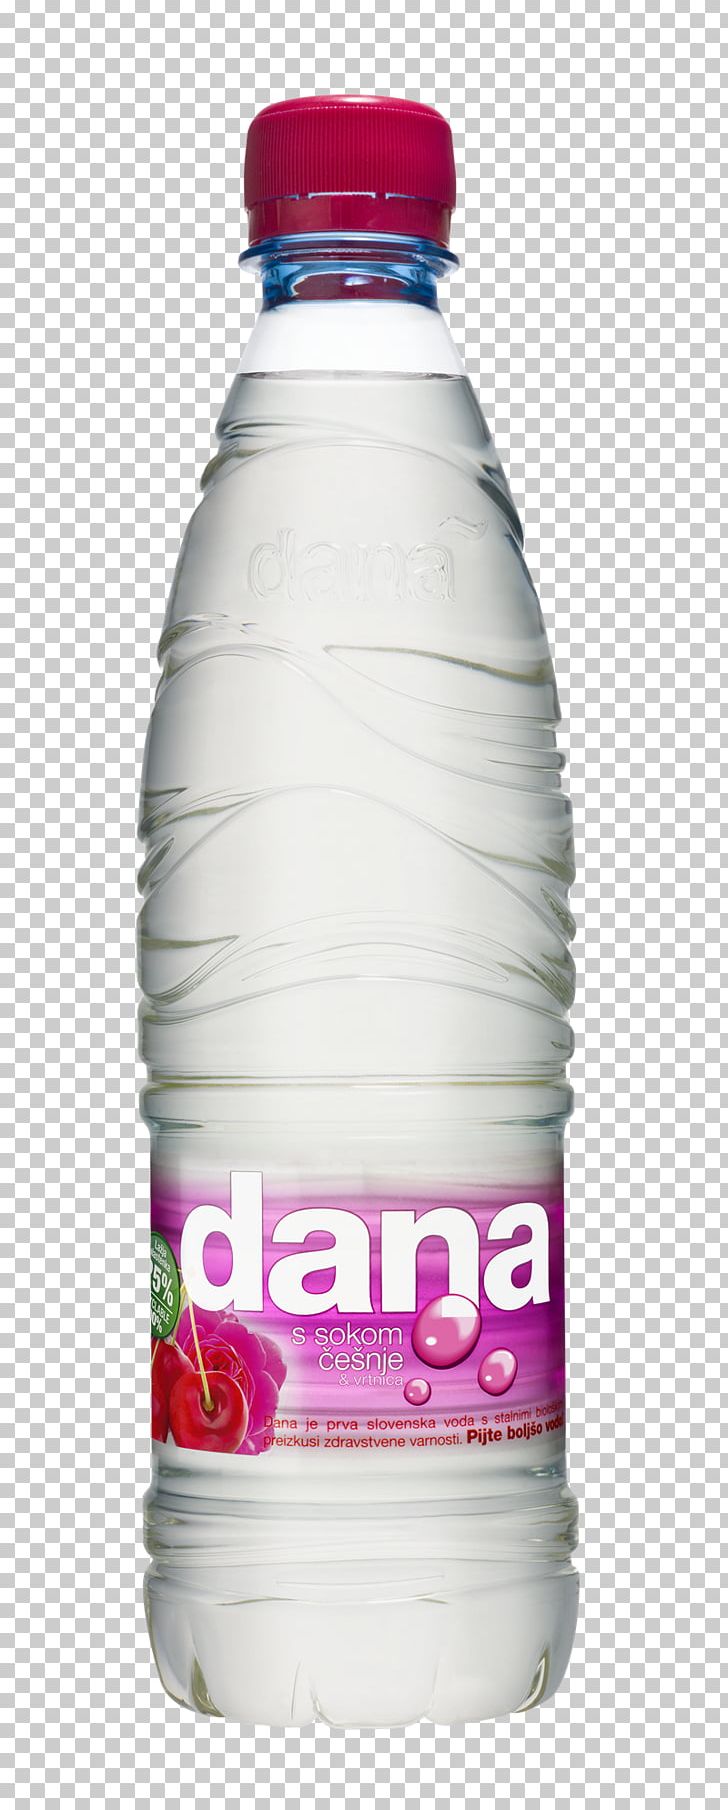 Mineral Water Water Bottles Enhanced Water Distilled Water Bottled Water PNG, Clipart, Bottle, Bottled Water, Distilled Water, Drink, Drinking Water Free PNG Download